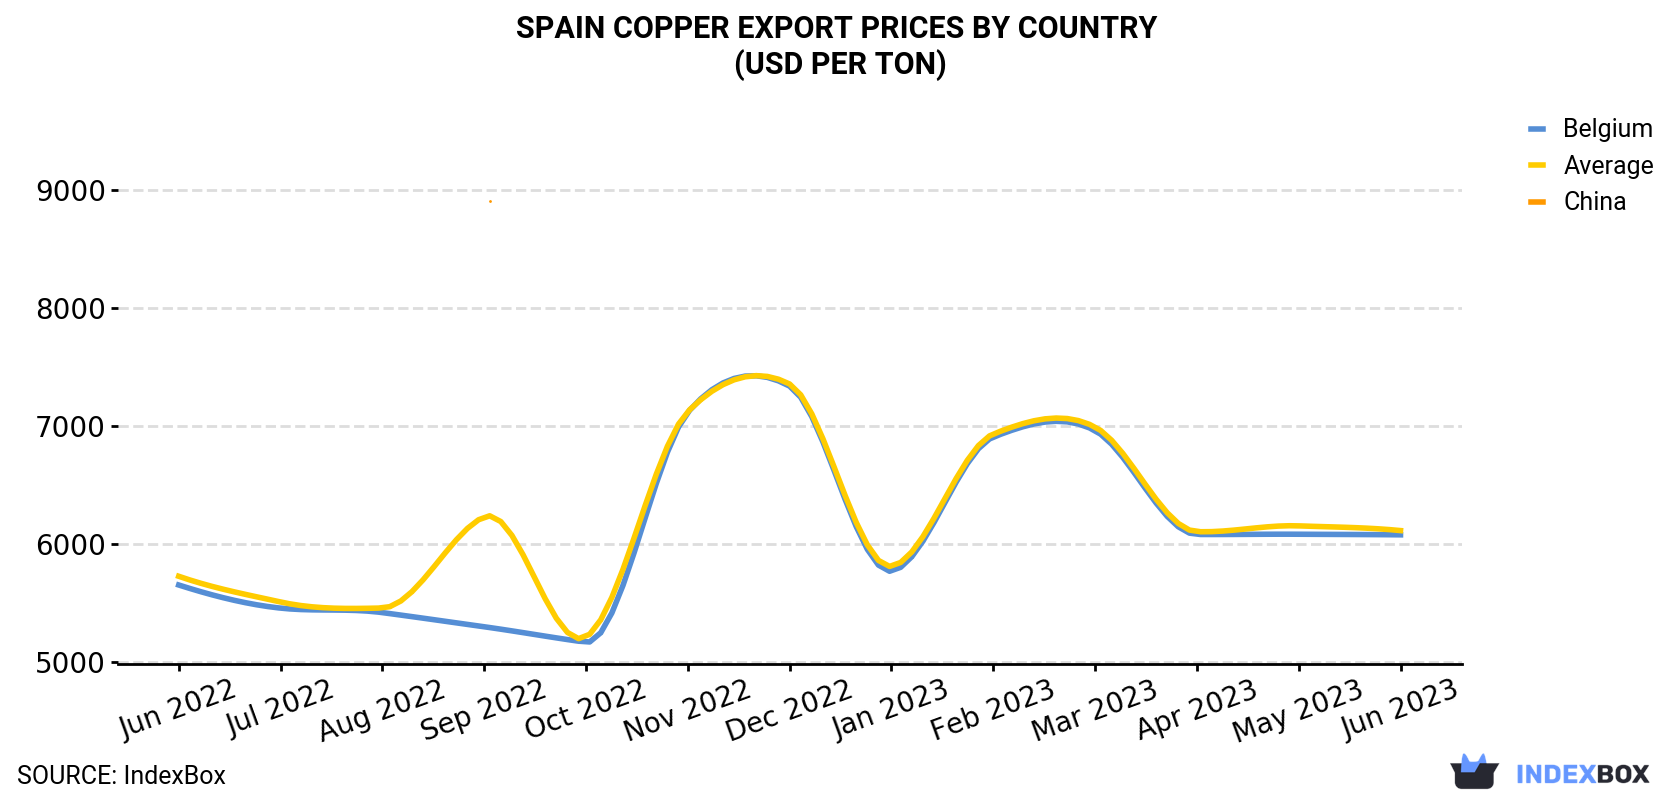 Spain Copper Export Prices By Country (USD Per Ton)